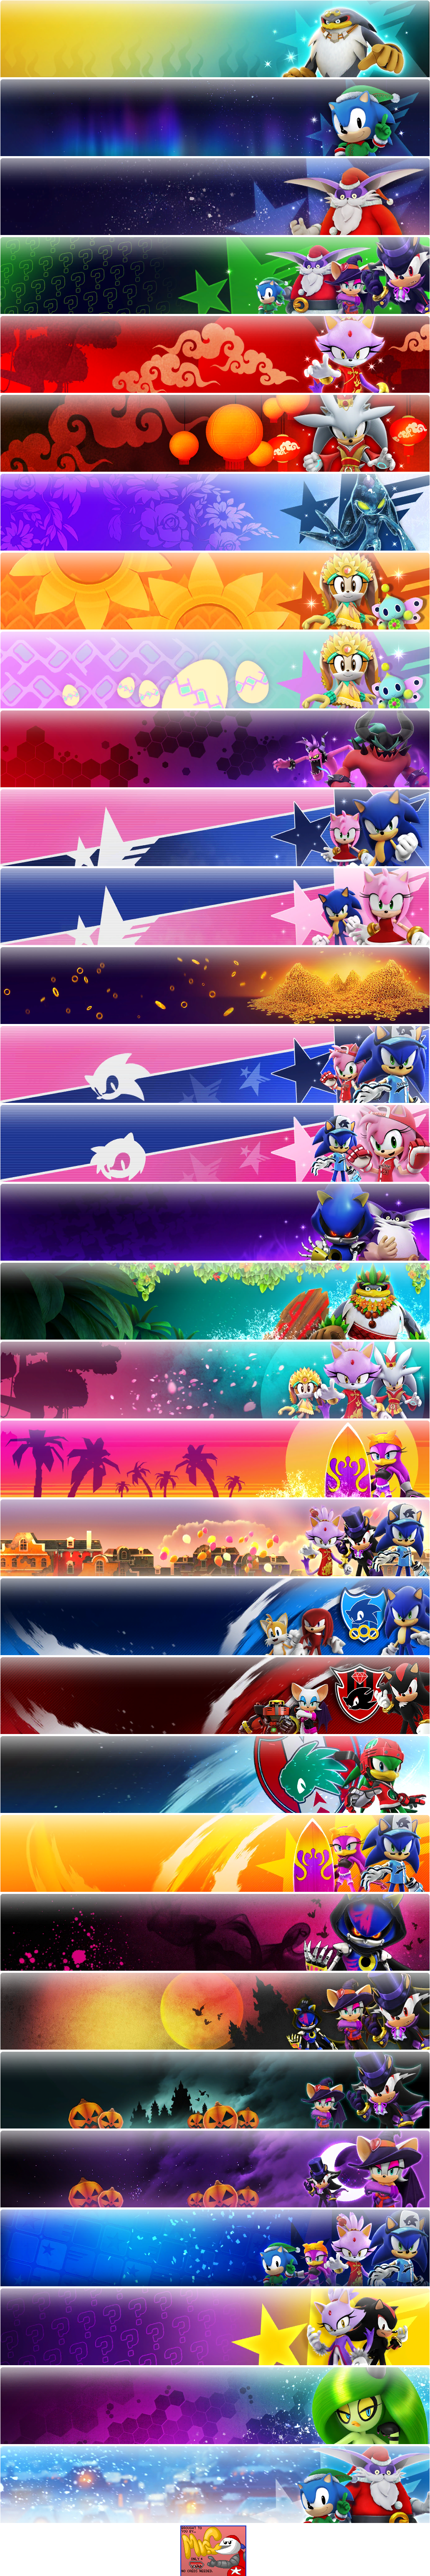 Sonic Forces: Speed Battle - Event Banners (2018 / 2019)